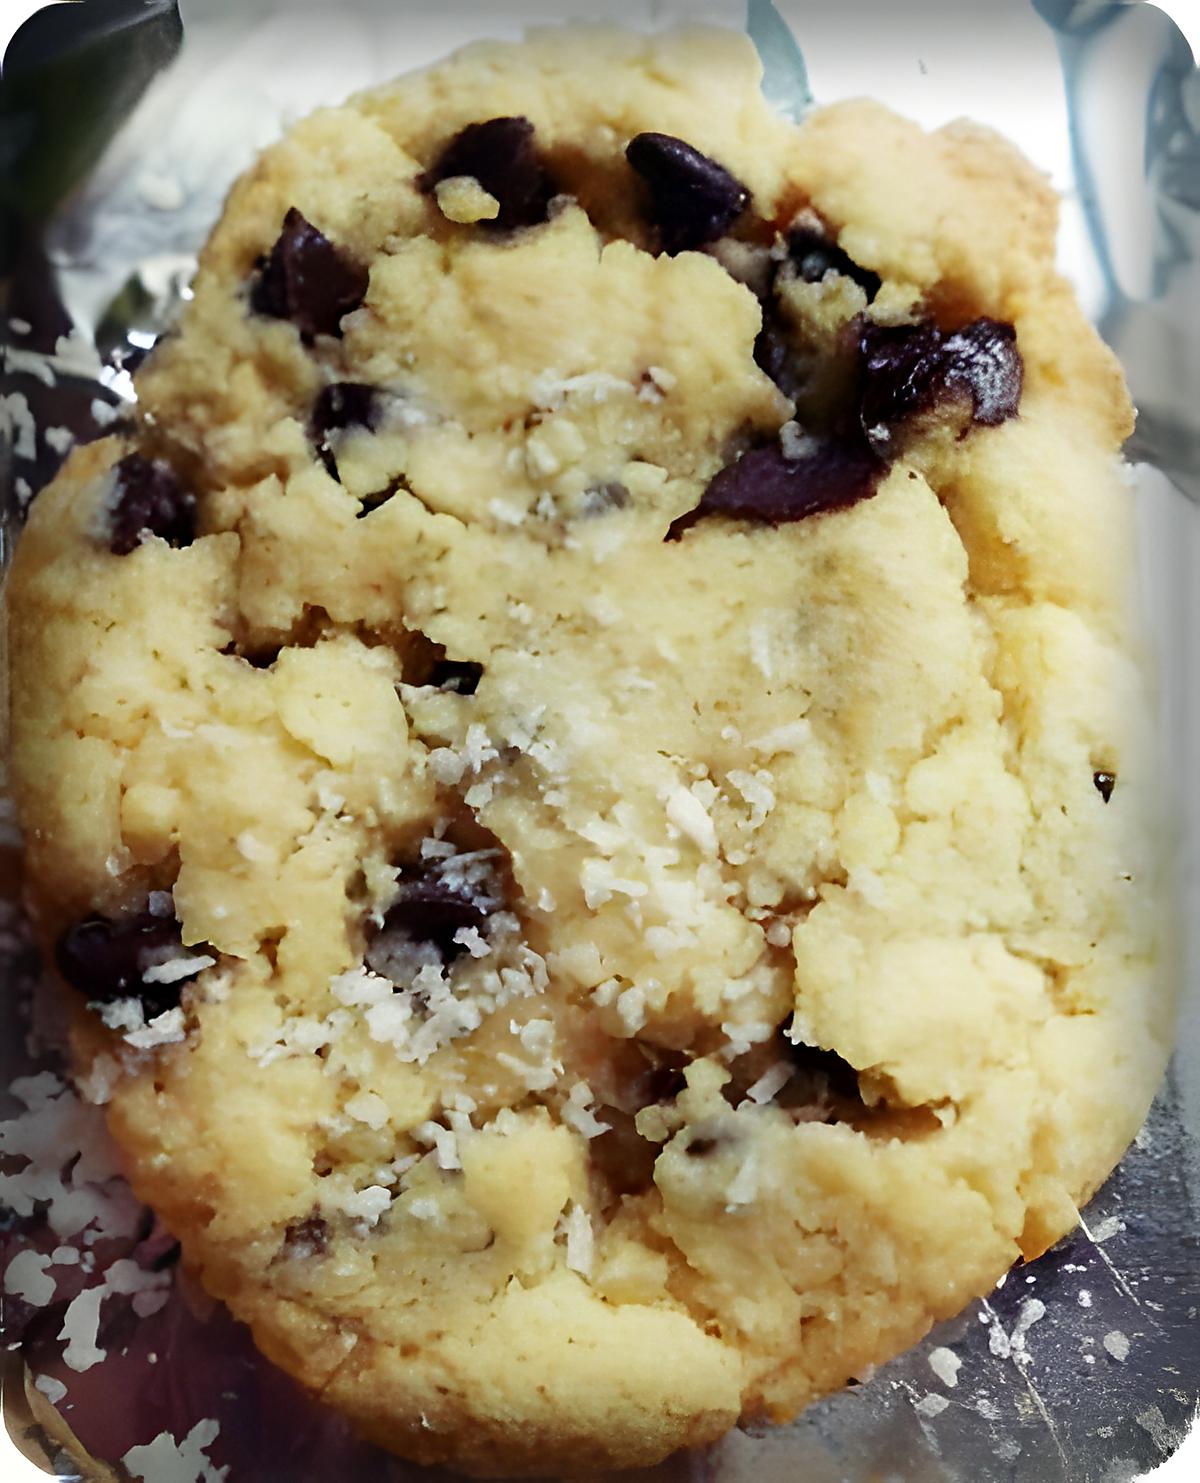 recette Cookies choco-coco